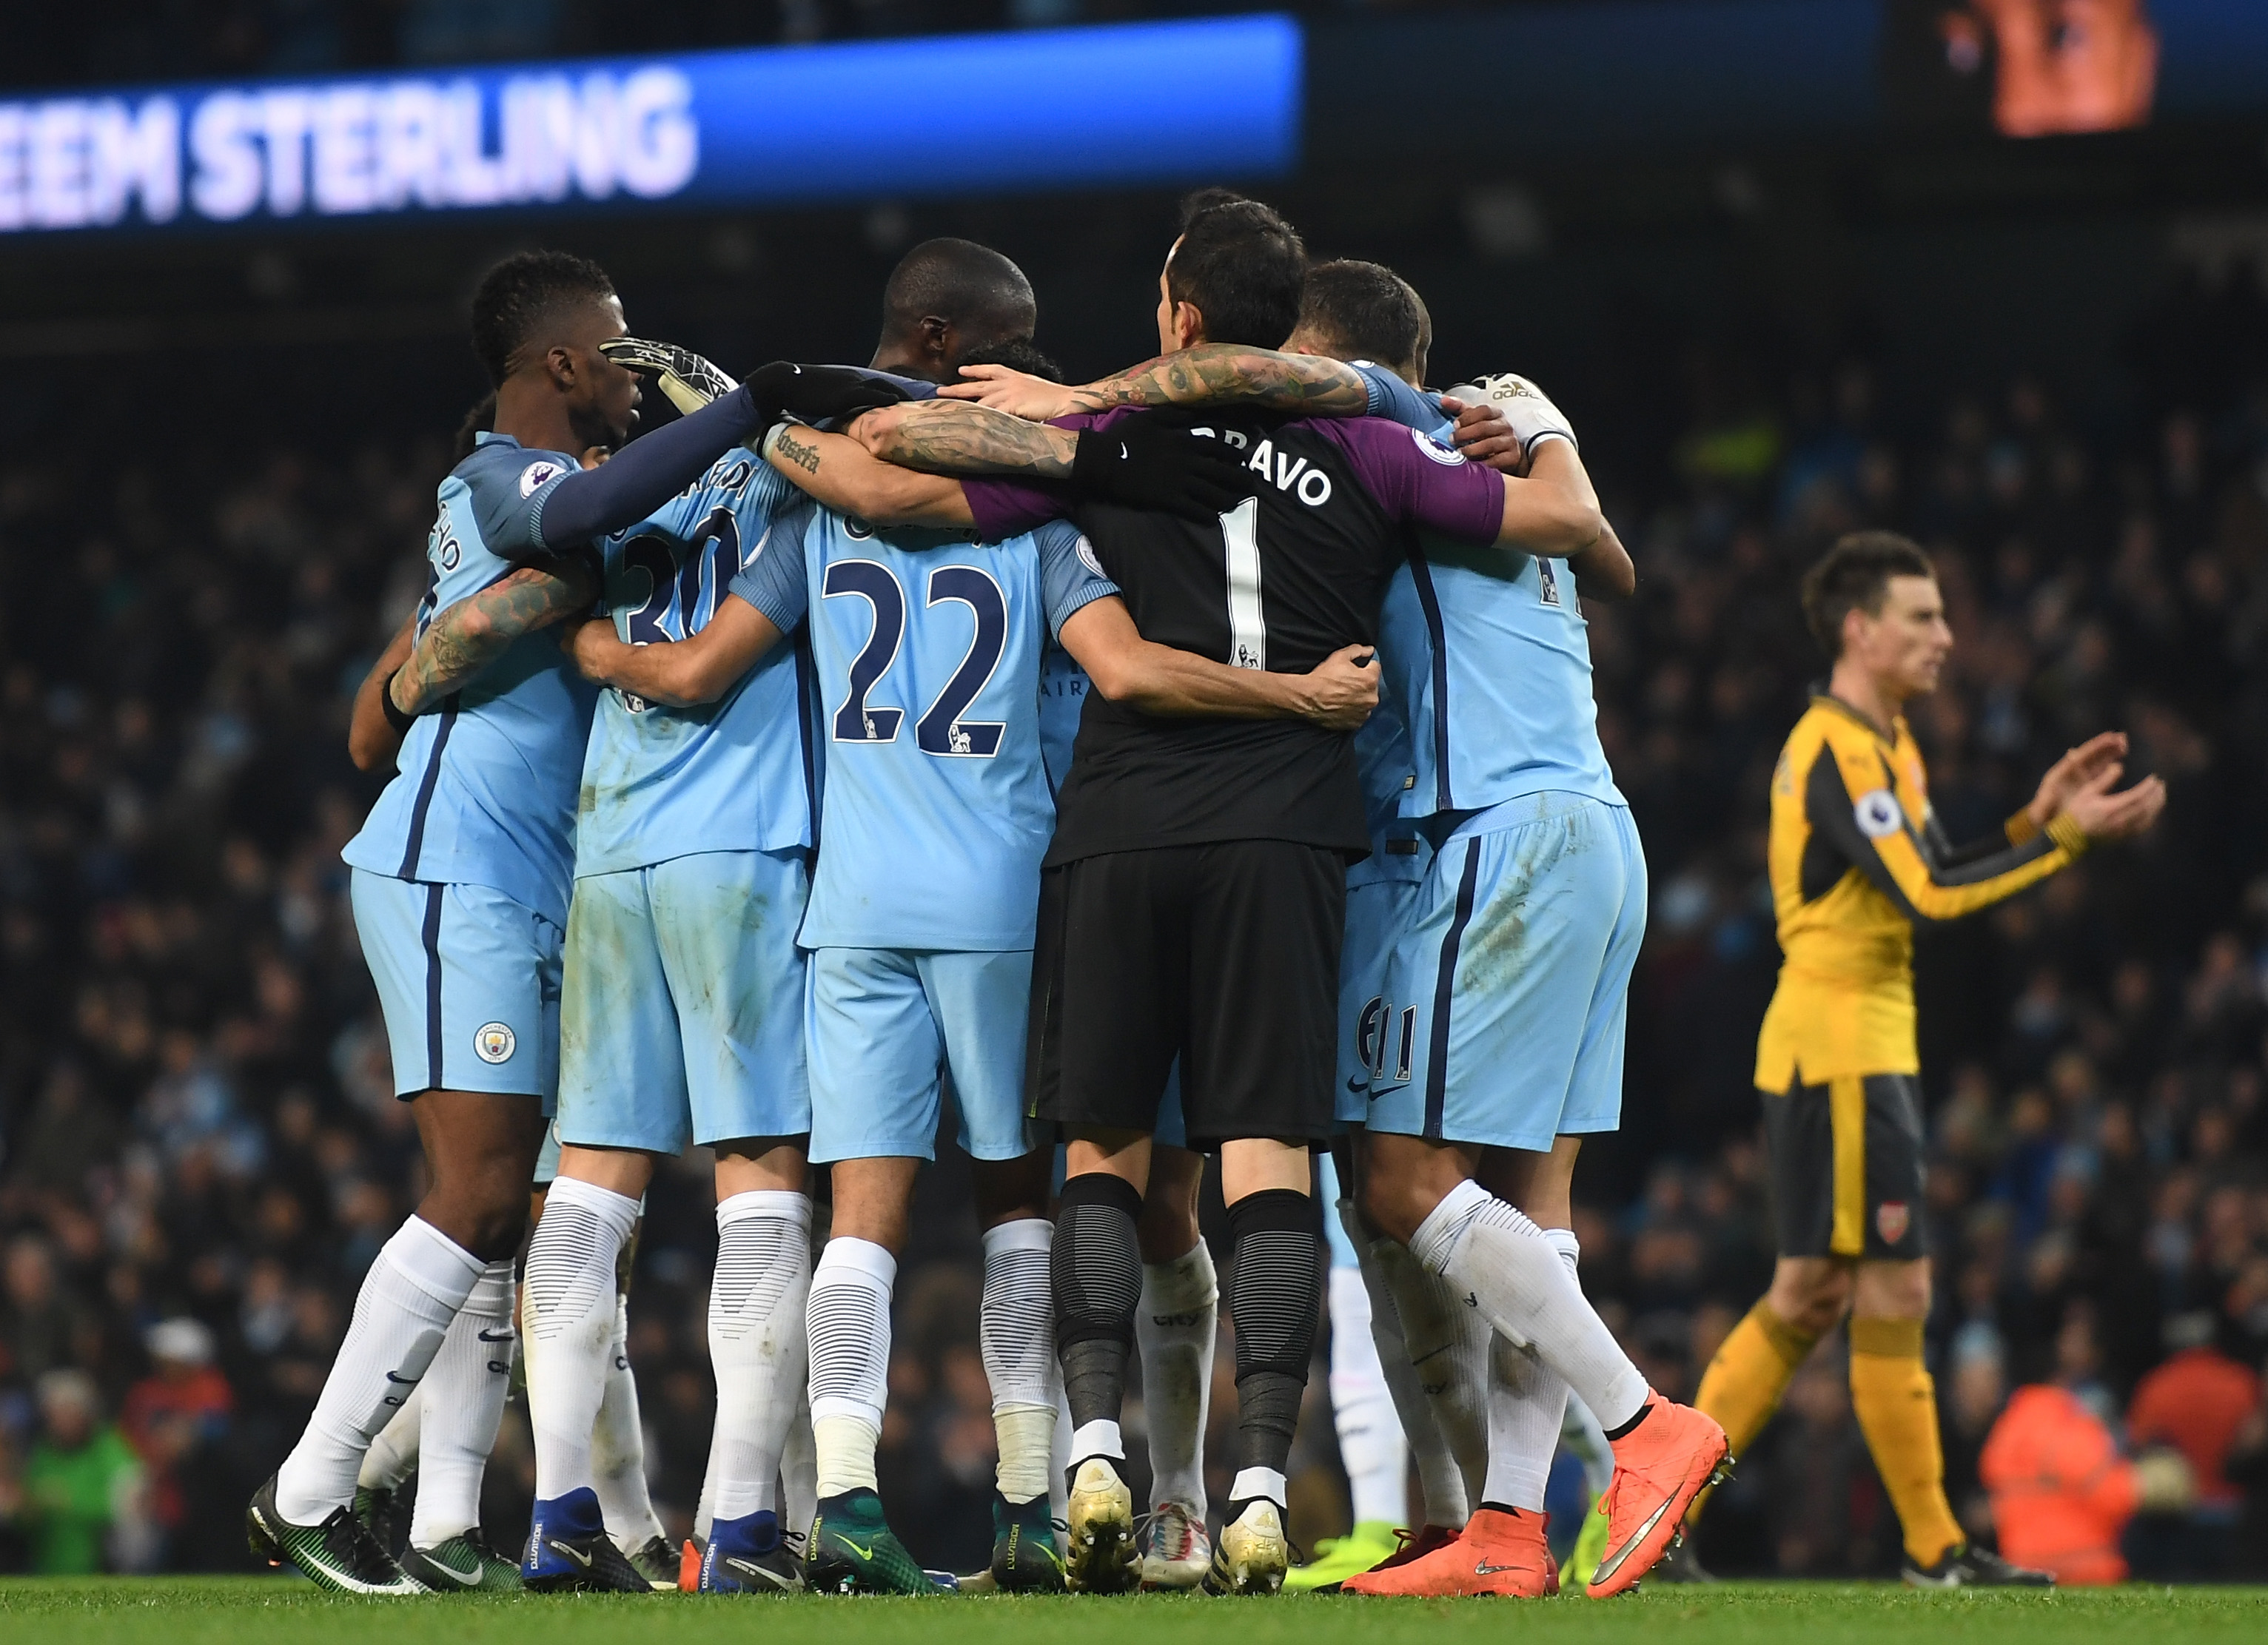 MANCHESTER, ENGLAND - DECEMBER 18:  The Manchester City team celebrate after the final whistle during the Premier League match between Manchester City and Arsenal at the Etihad Stadium on December 18, 2016 in Manchester, England.  (Photo by Michael Regan/Getty Images)